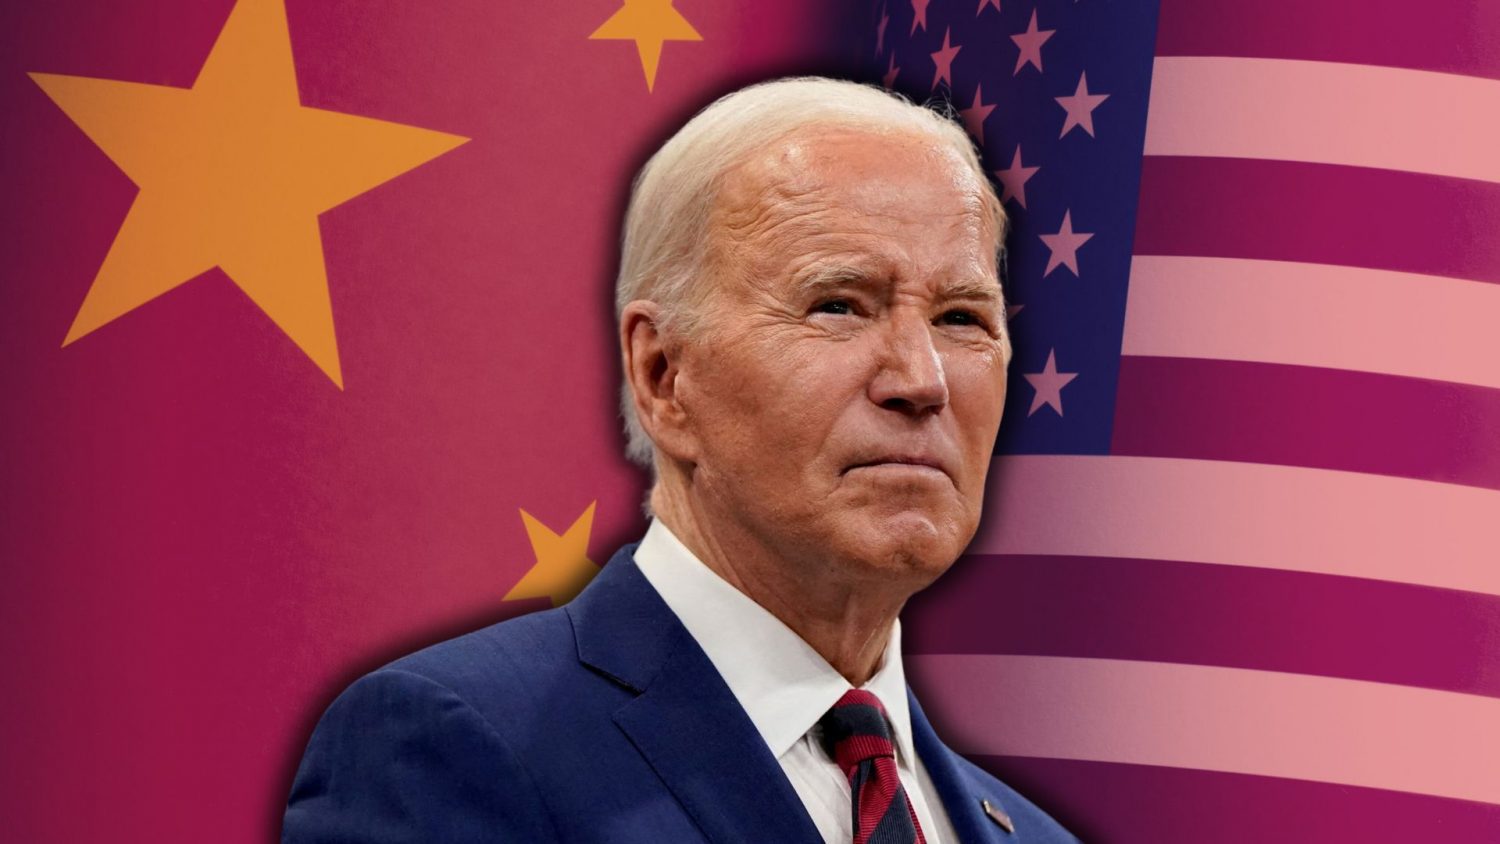 A coalition of American business groups requested the Biden administration to extend the public comment period for tariffs on Chinese imports